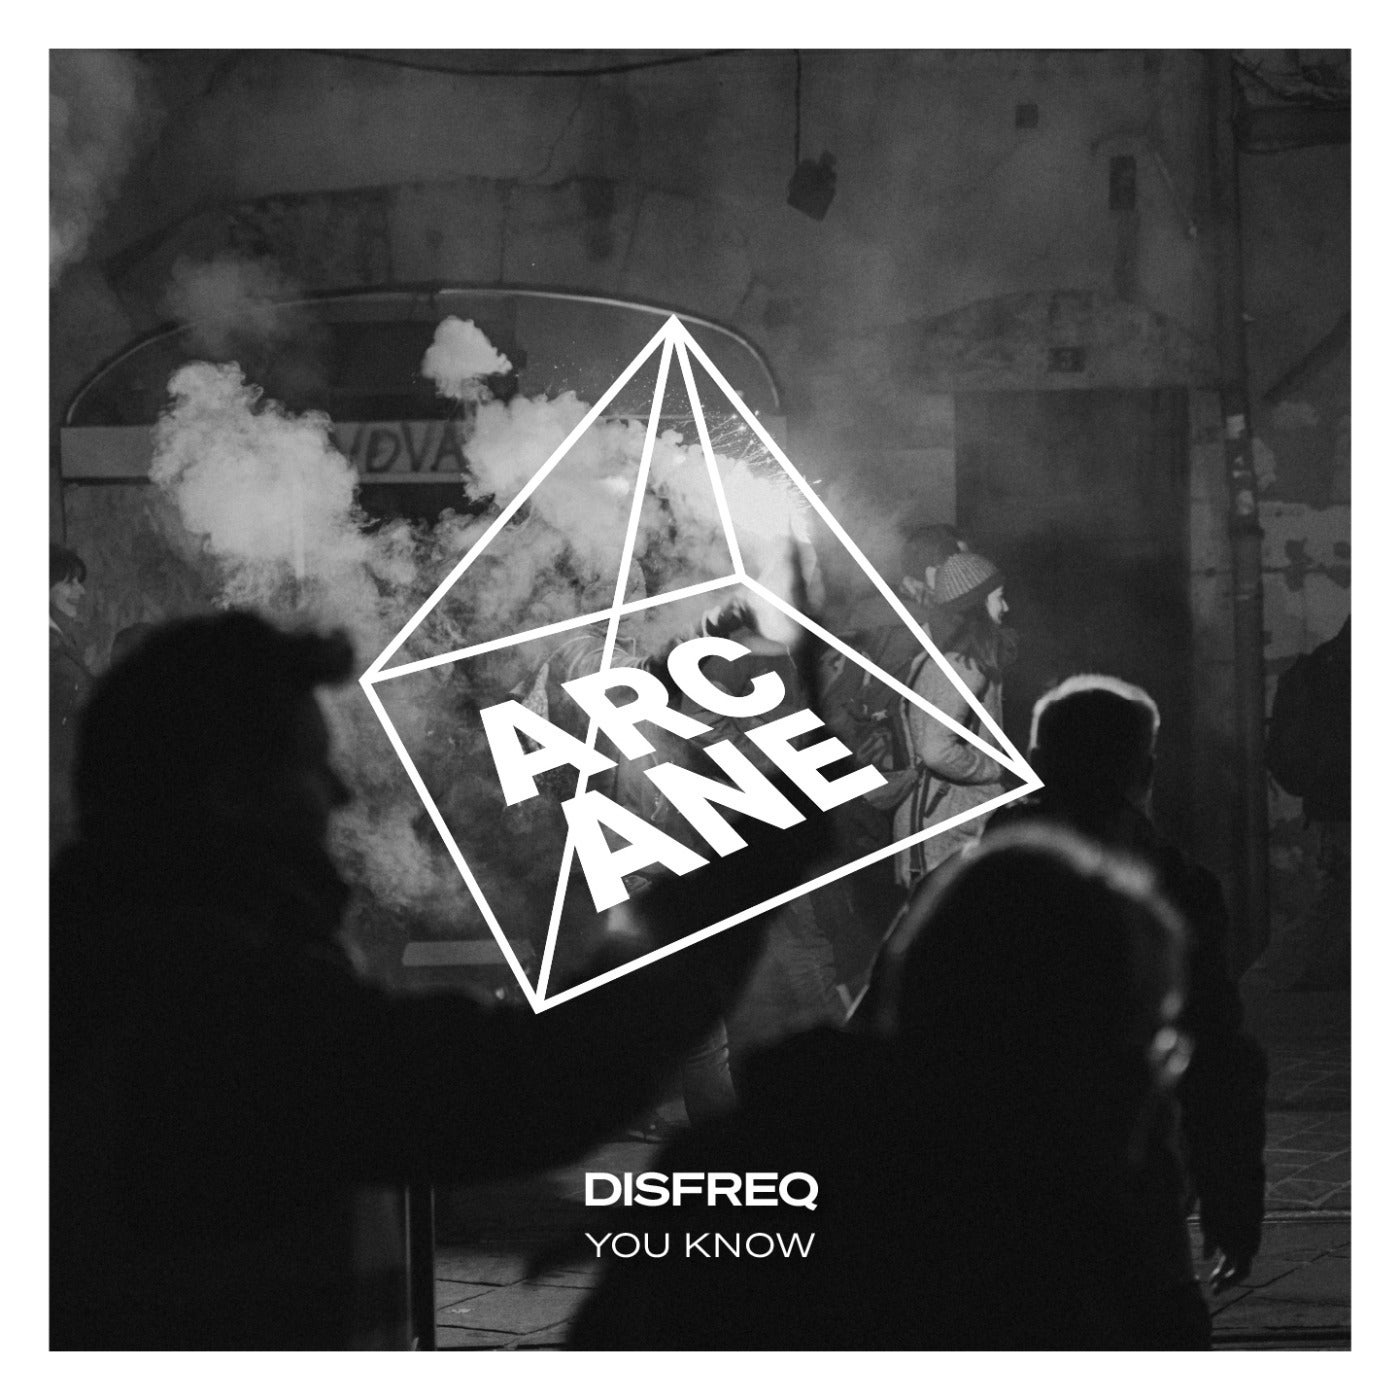 Disfreq - You Know [Arcane Music] | Music & Downloads on Beatport